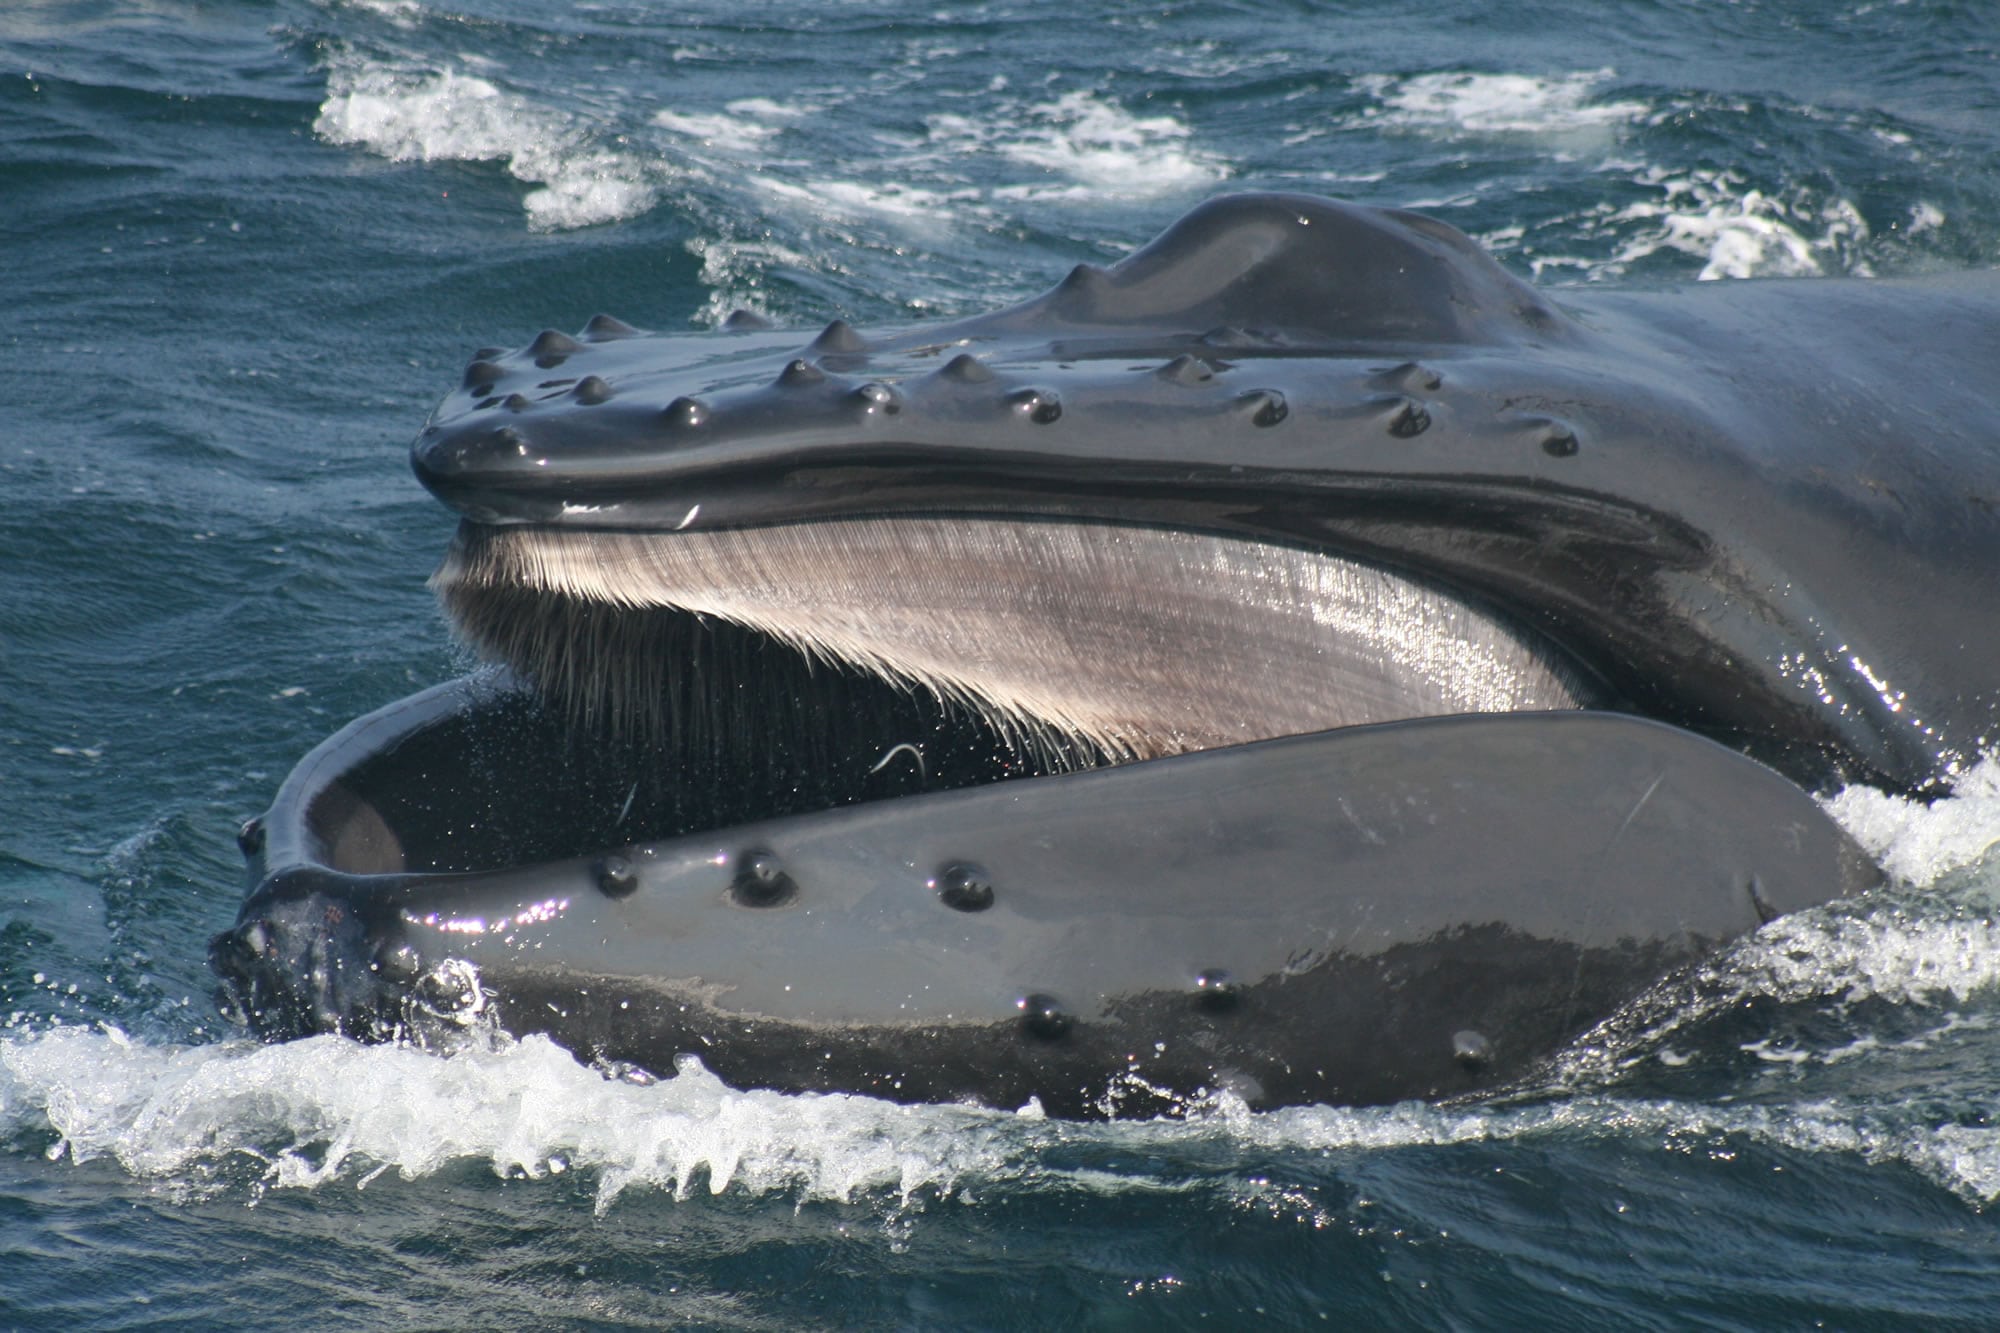 What is baleen? - Whale & Dolphin Conservation Australia